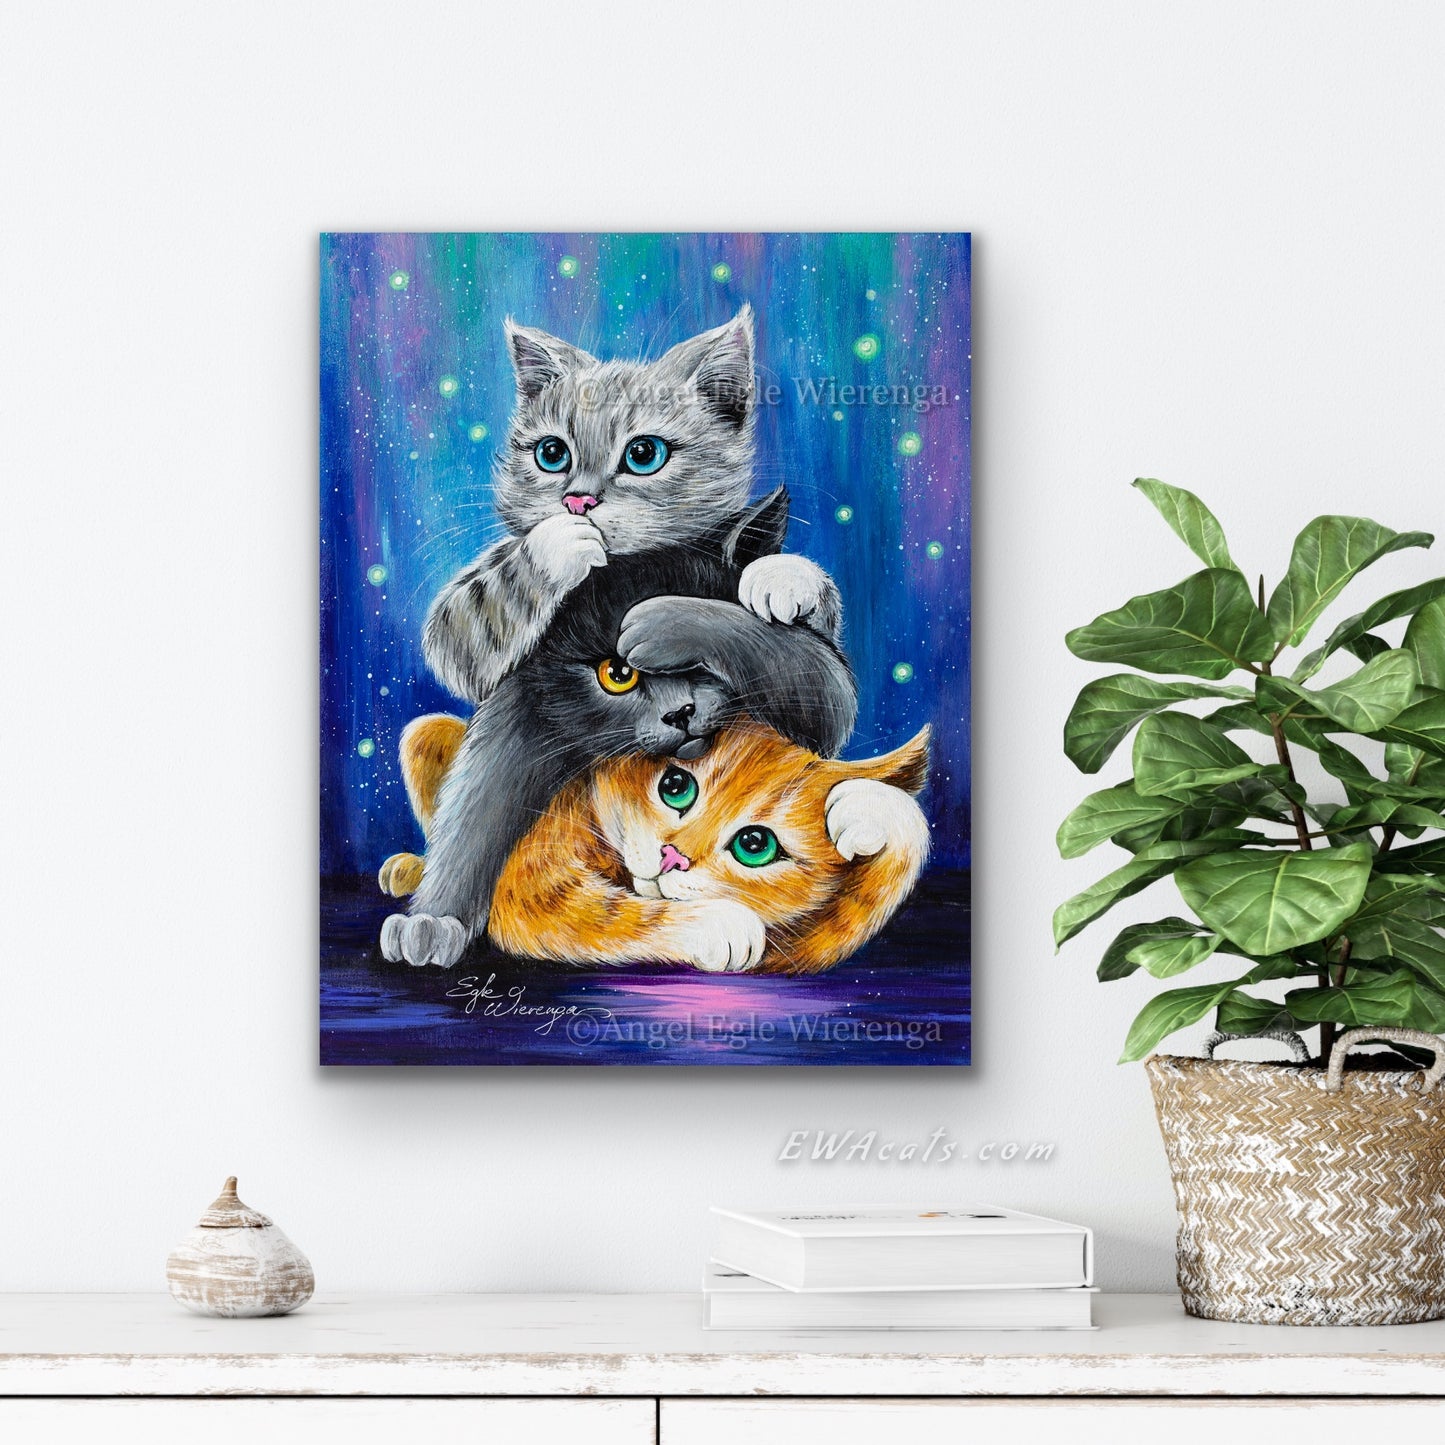 CANVAS "Three Wise Kitties" Open & Limited Edition